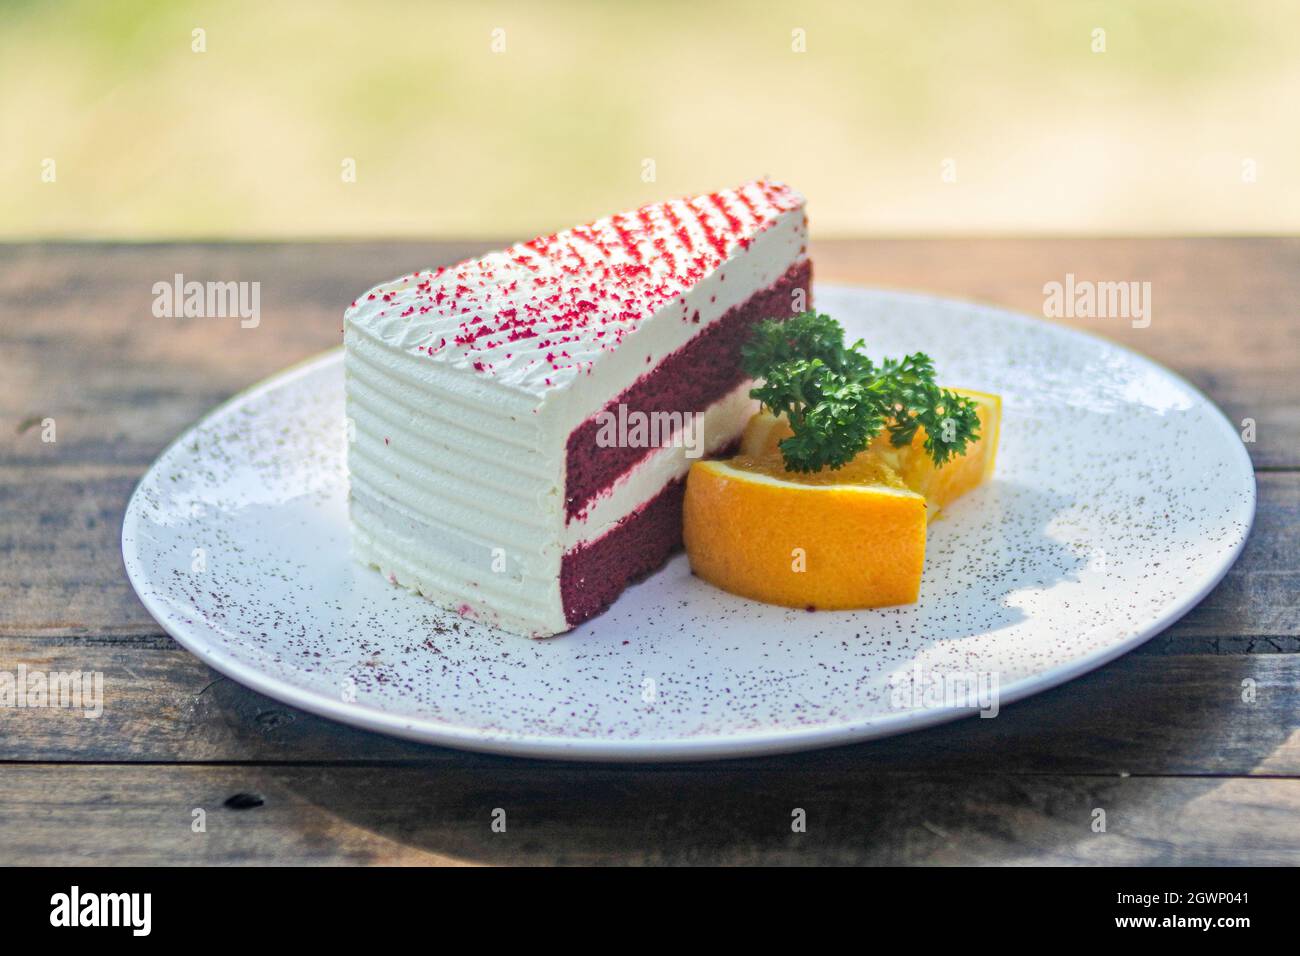 Close-up of Cake On Table Banque D'Images